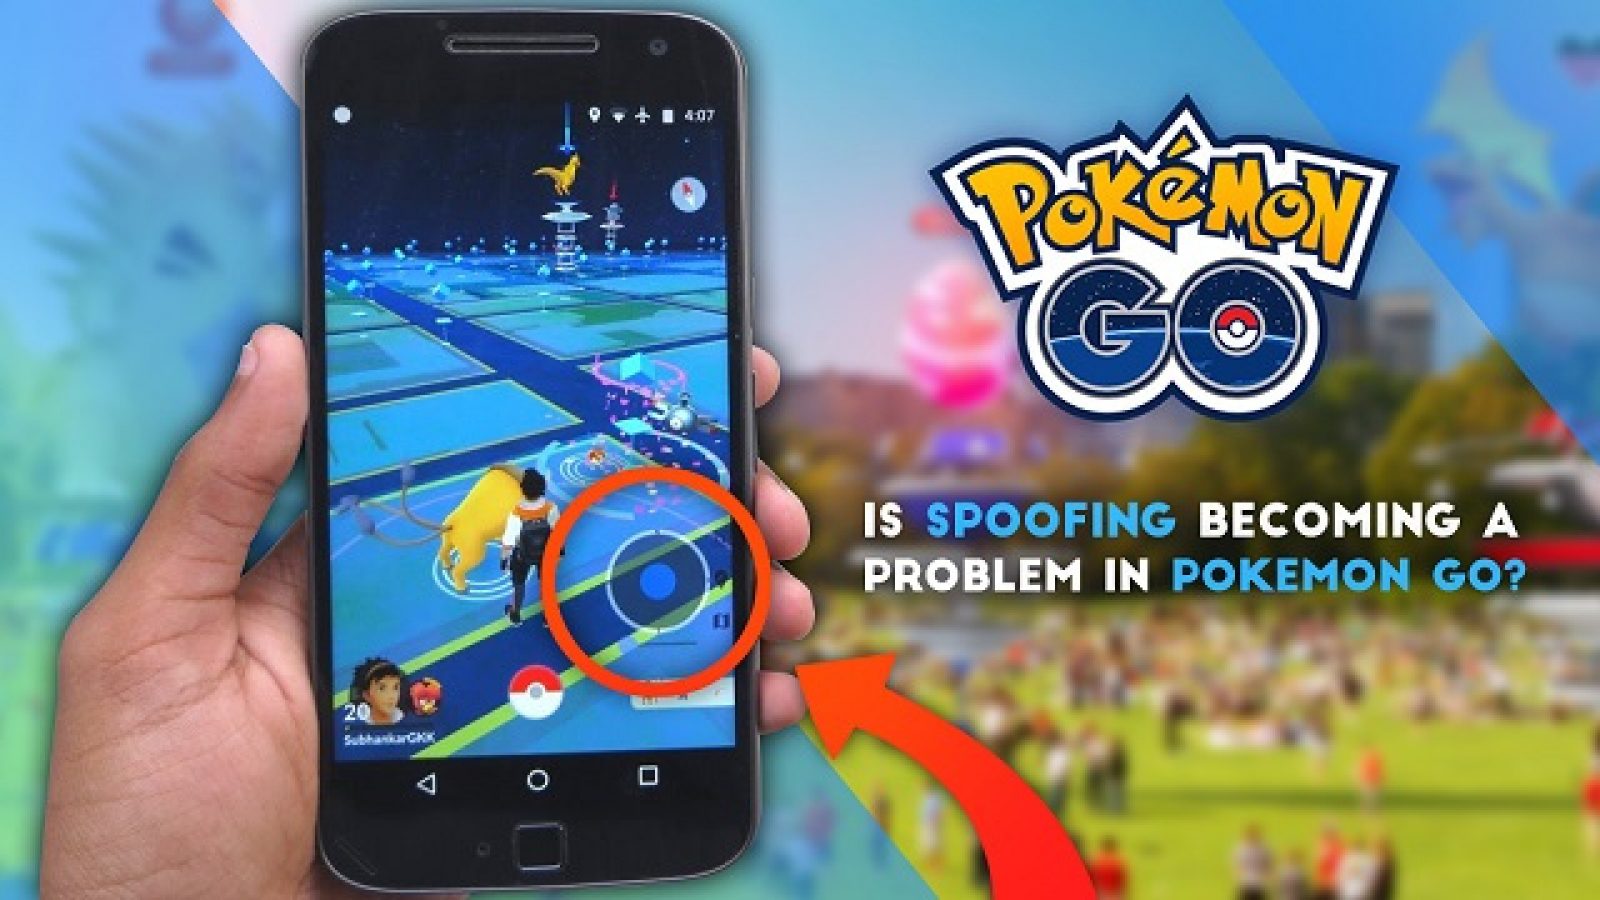 How does Pokemon go know if you are spoofing?